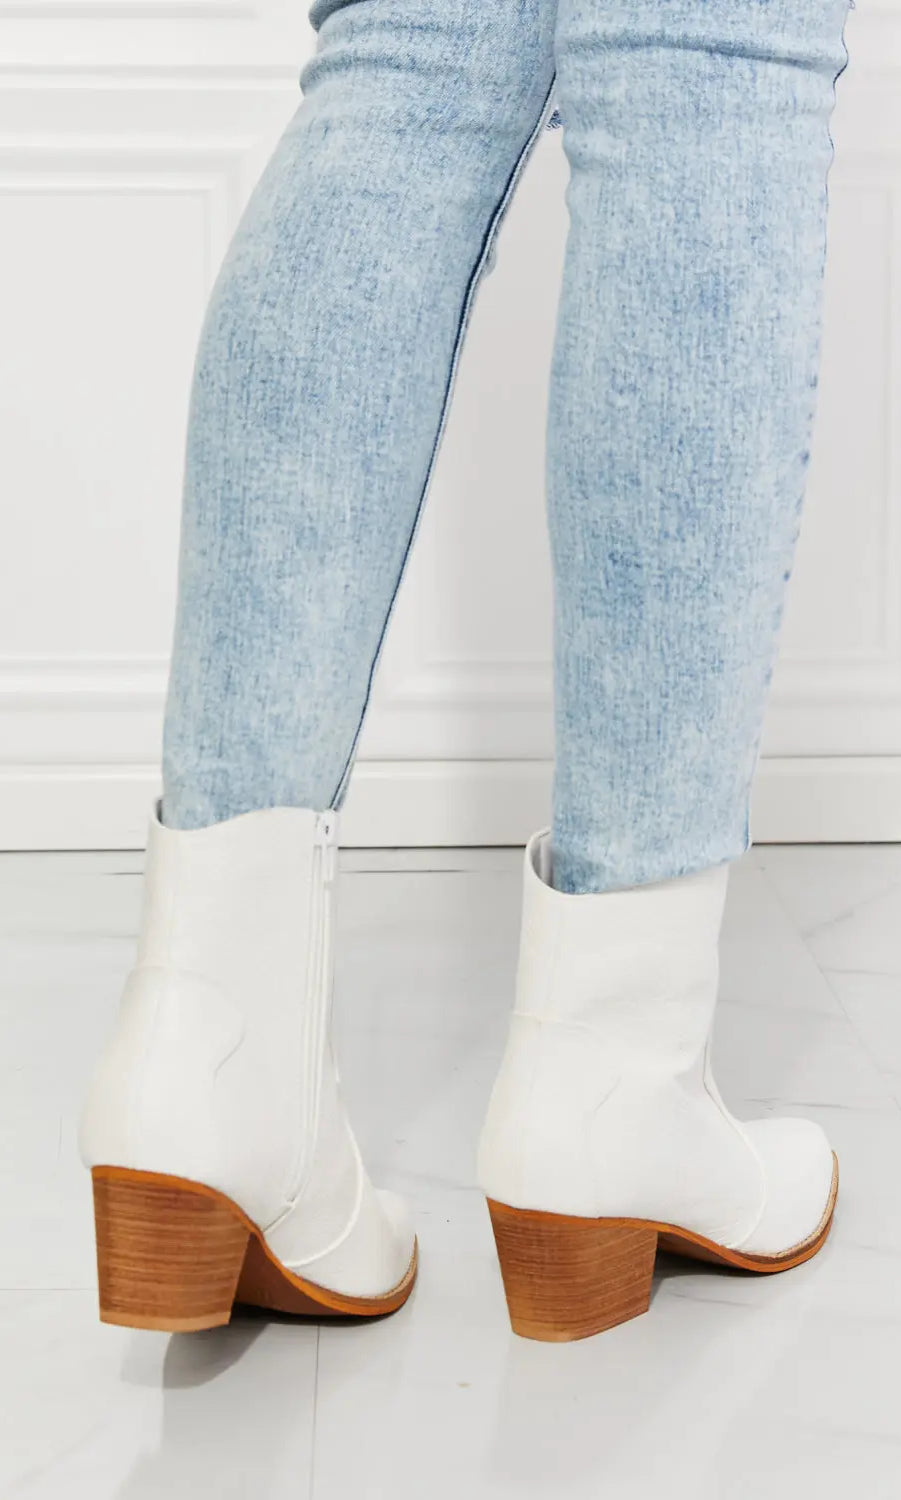 MMShoes Watertower Town Faux Leather Western Ankle Boots in White MMShoes